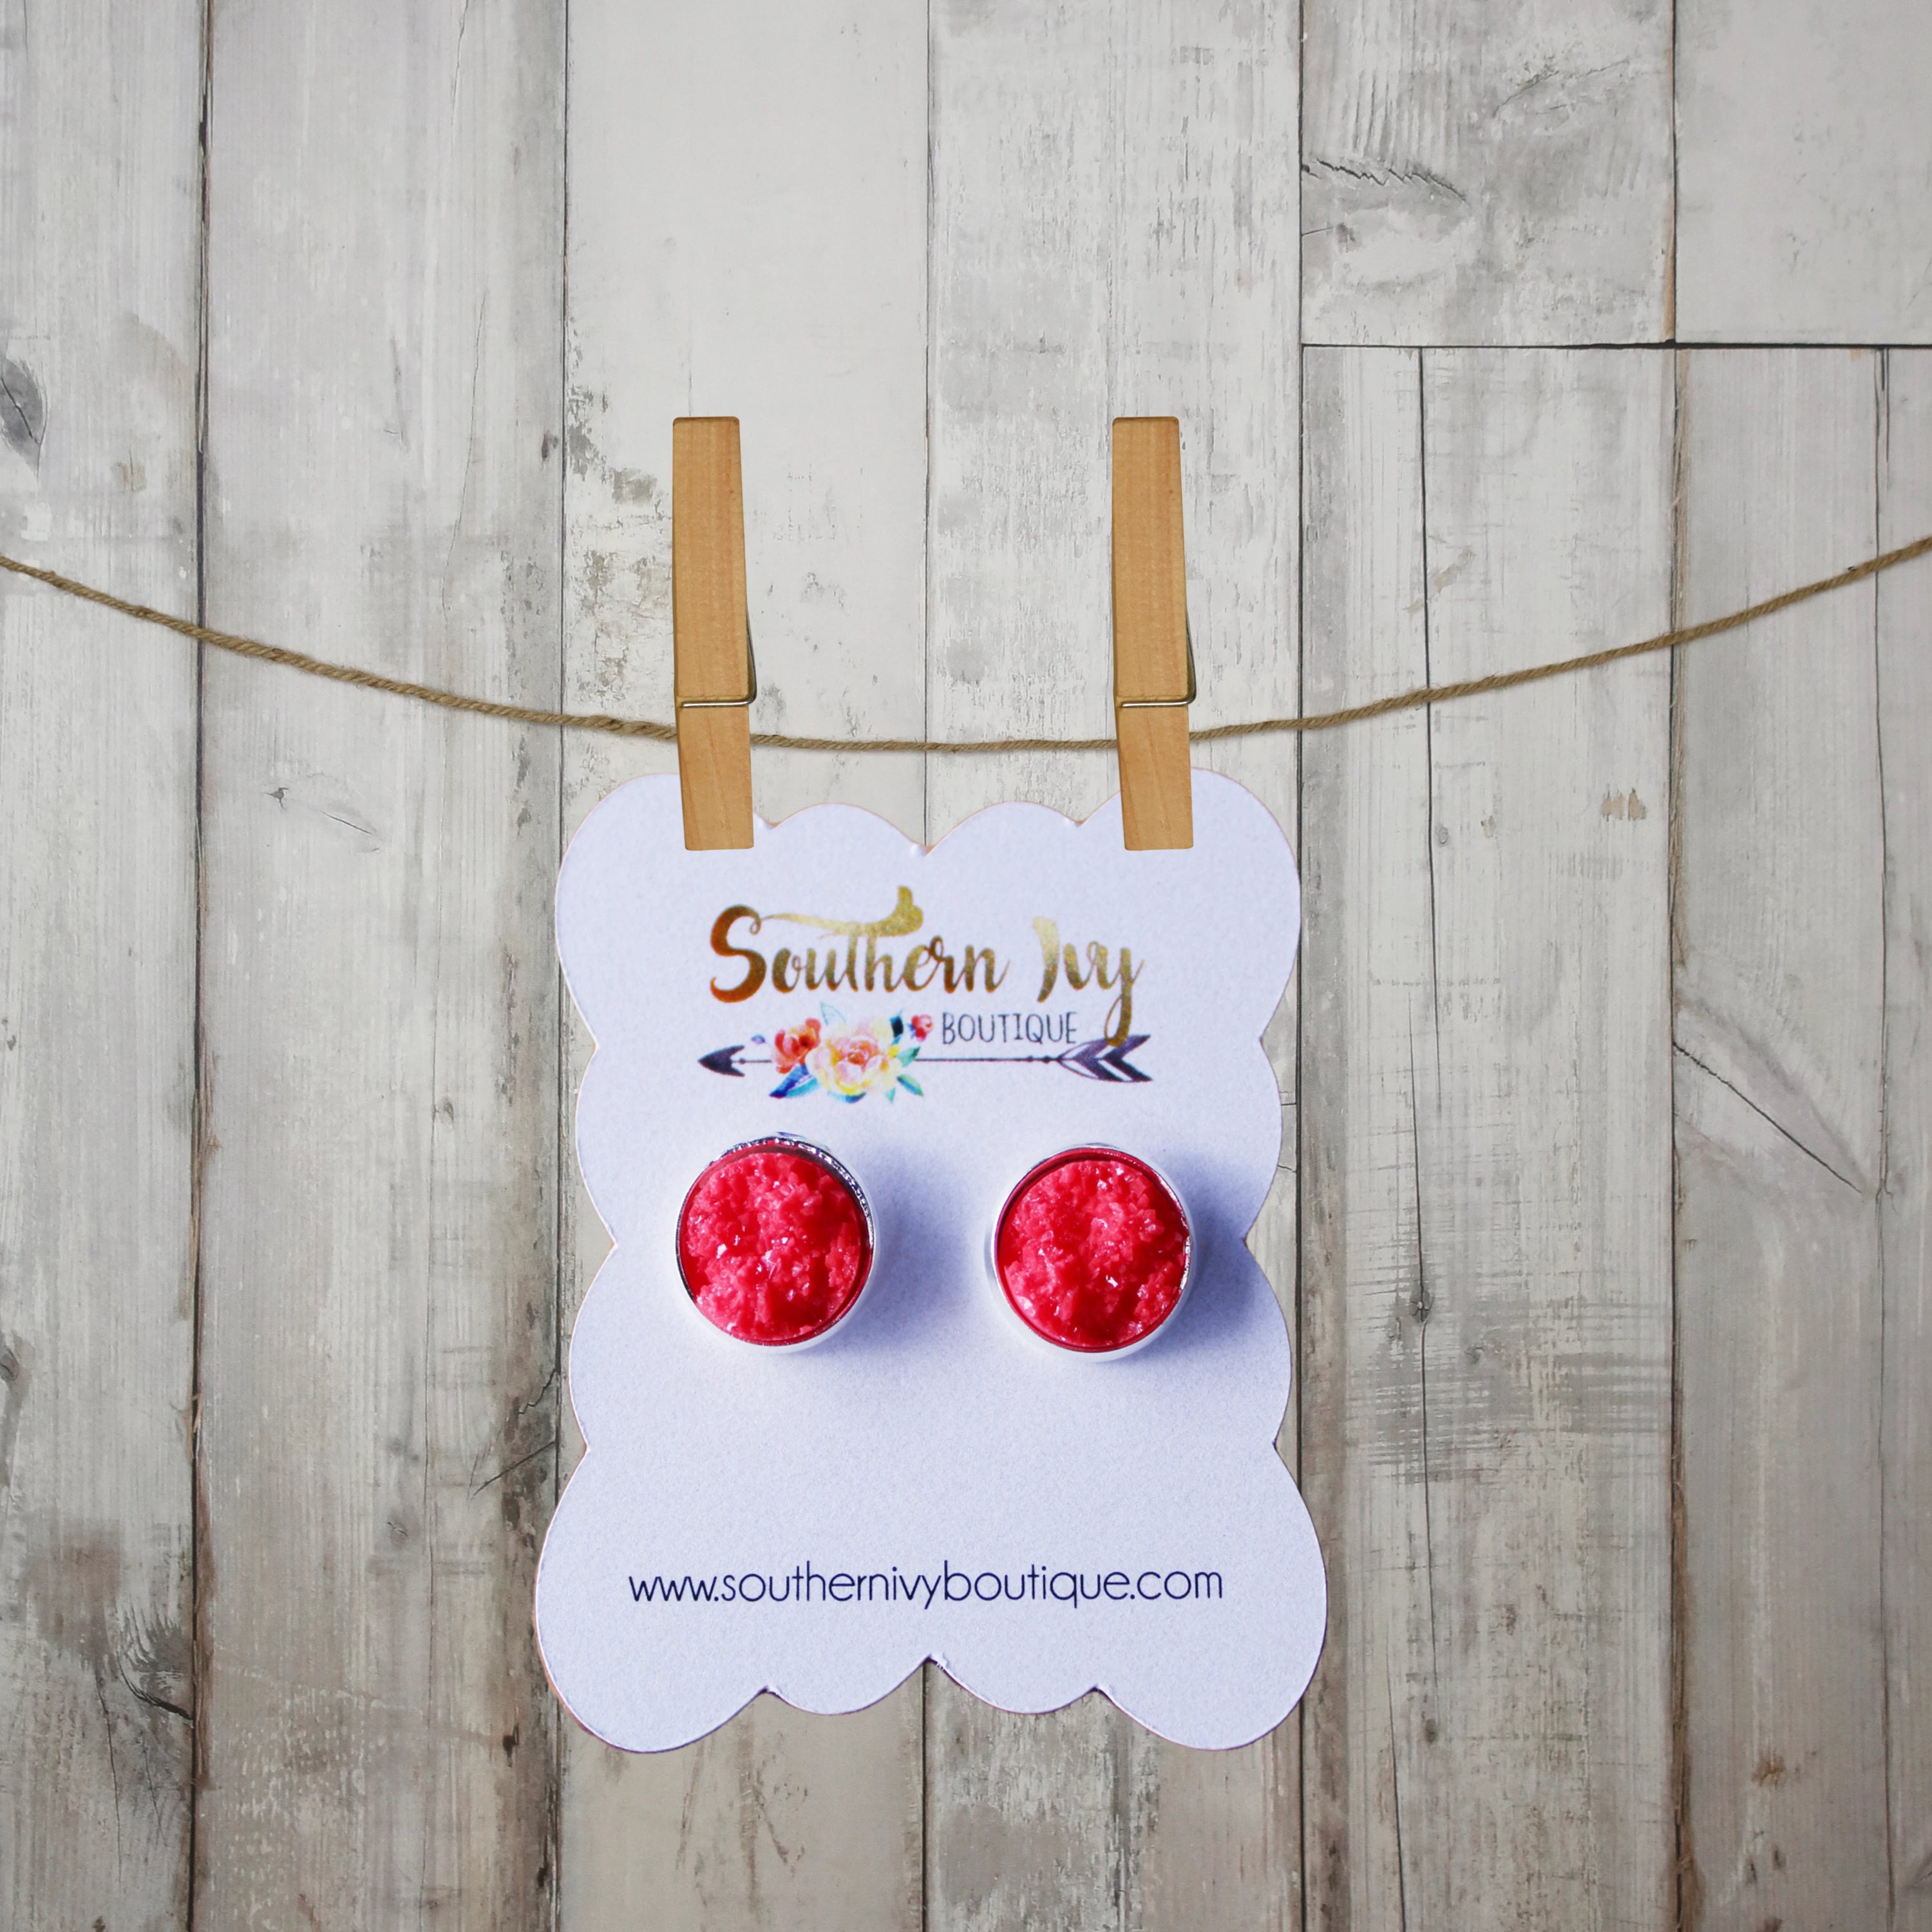 Red & Silver Post Druzy Earring - Southern Ivy Boutique